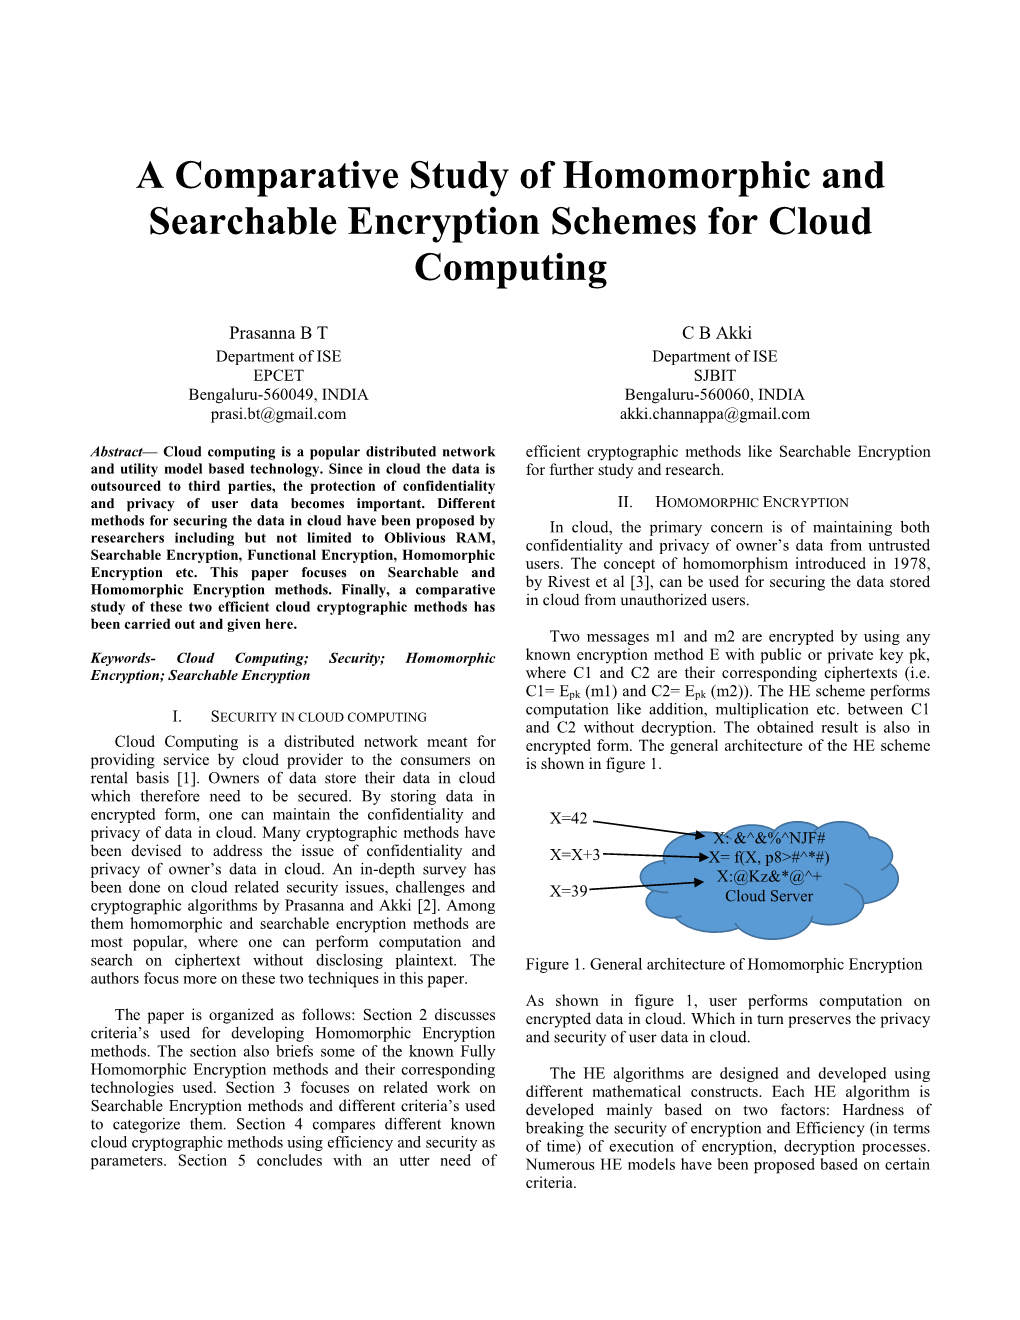 A Comparative Study of Homomorphic and Searchable Encryption Schemes for Cloud Computing